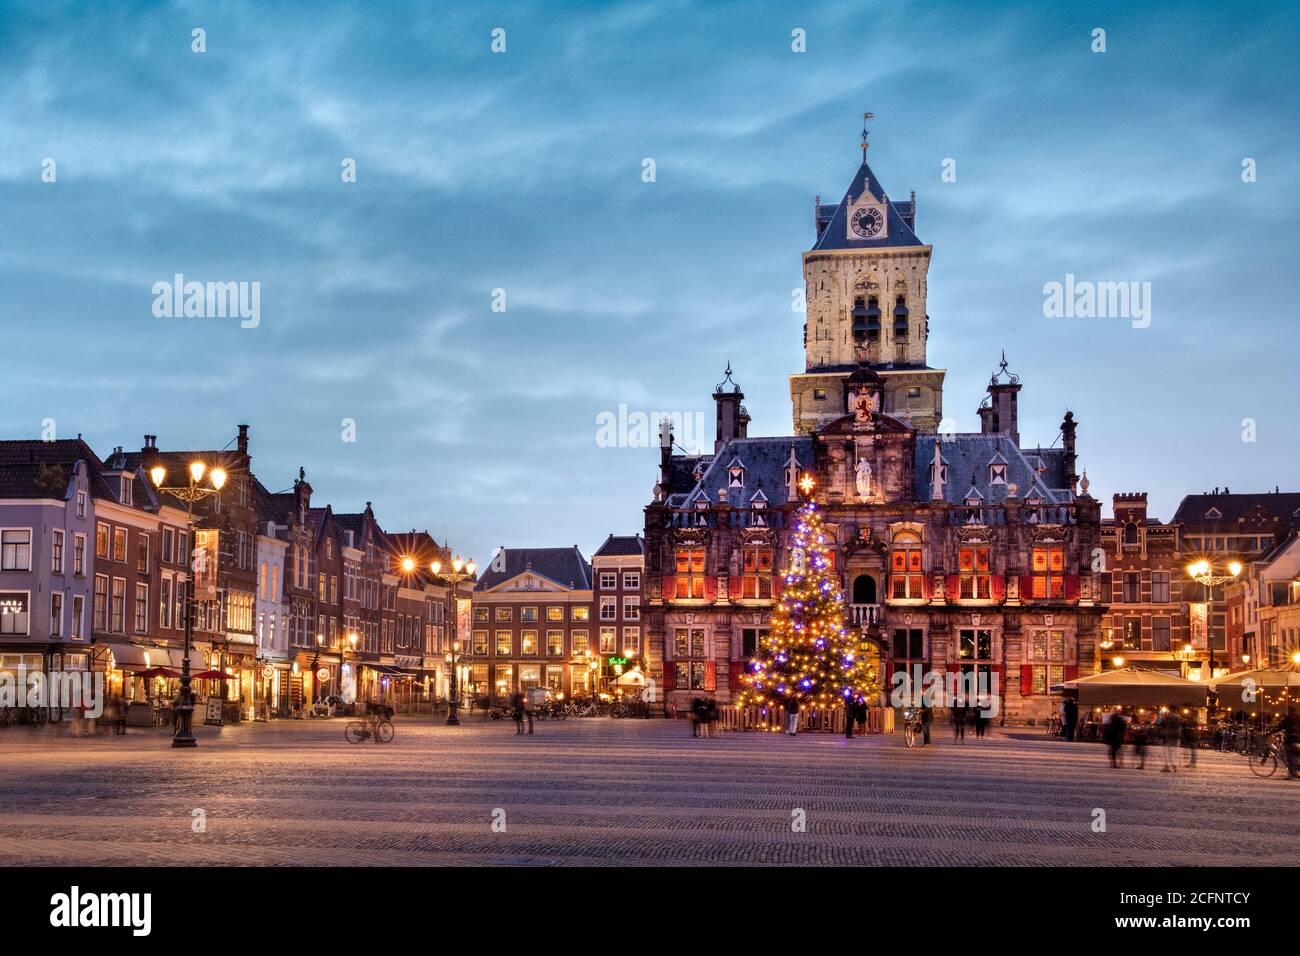 The Netherlands, Delft, Historic centre, old district, Market Square, Markt, city hall, town hall, 1620, Christmas tree, dusk. Stock Photo